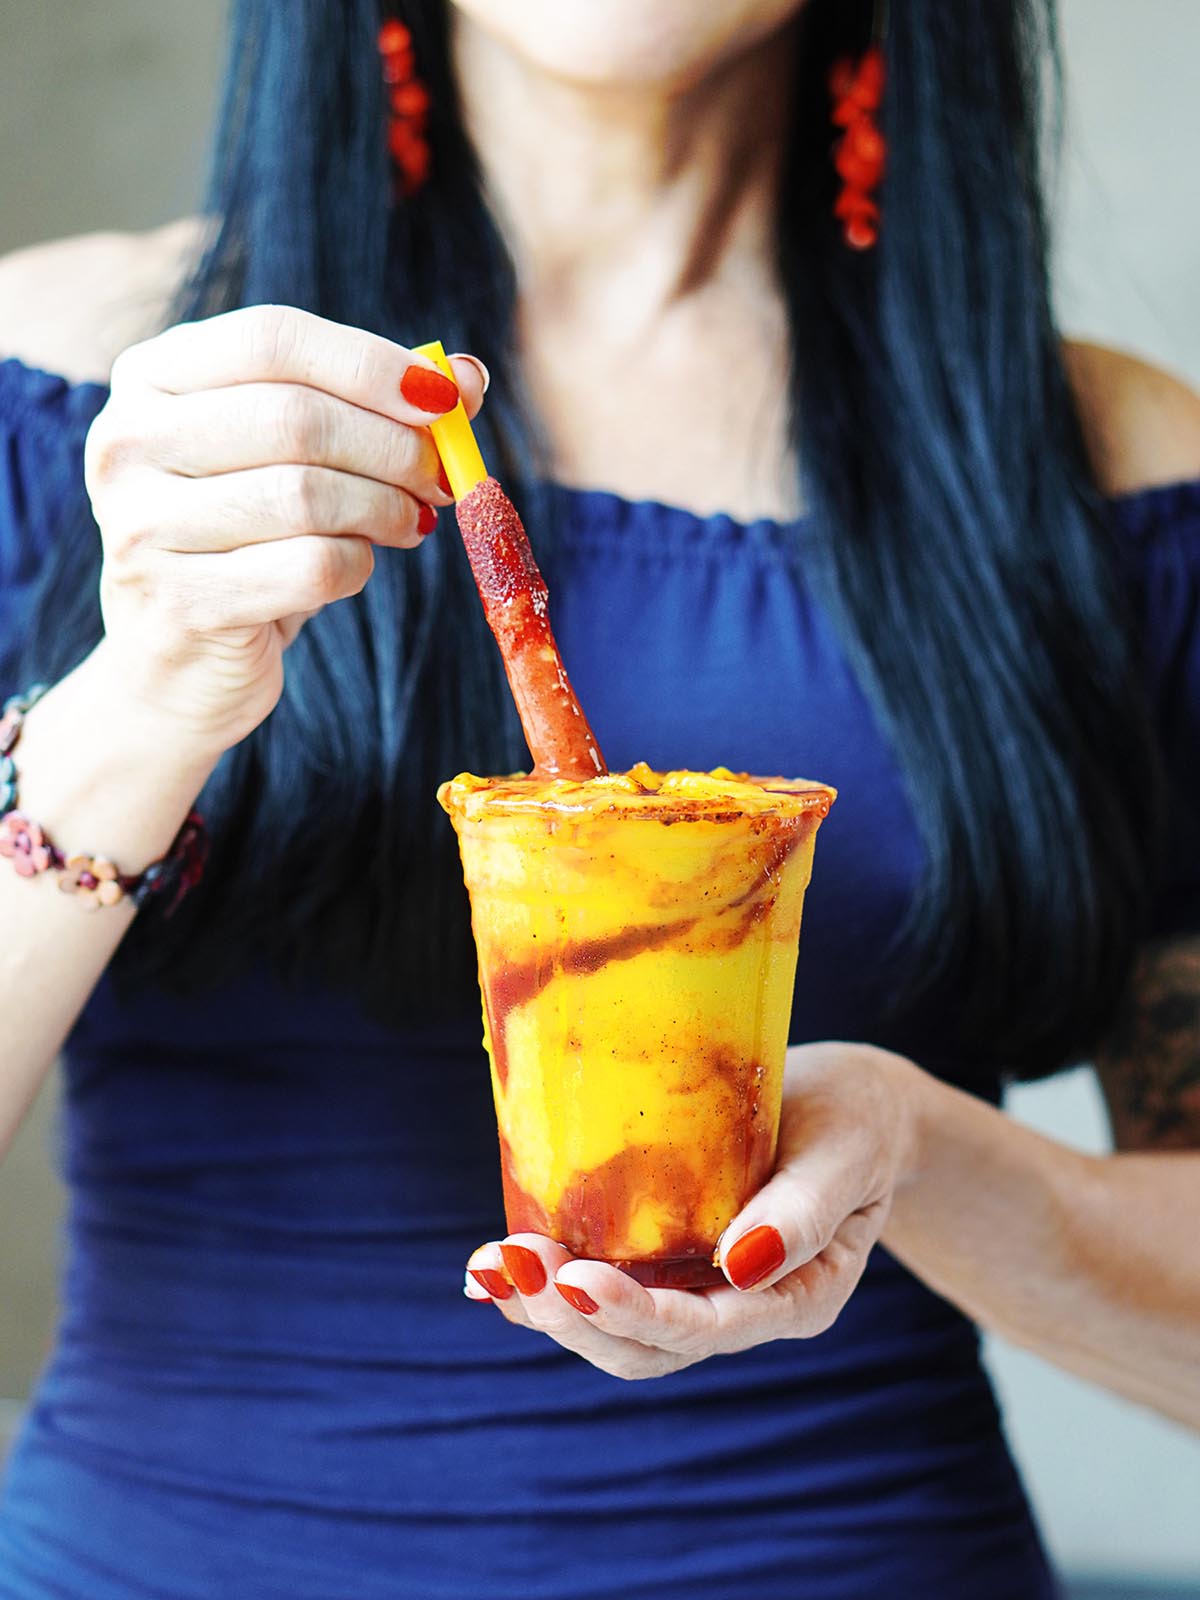 A person holding a mangonada with a hand.